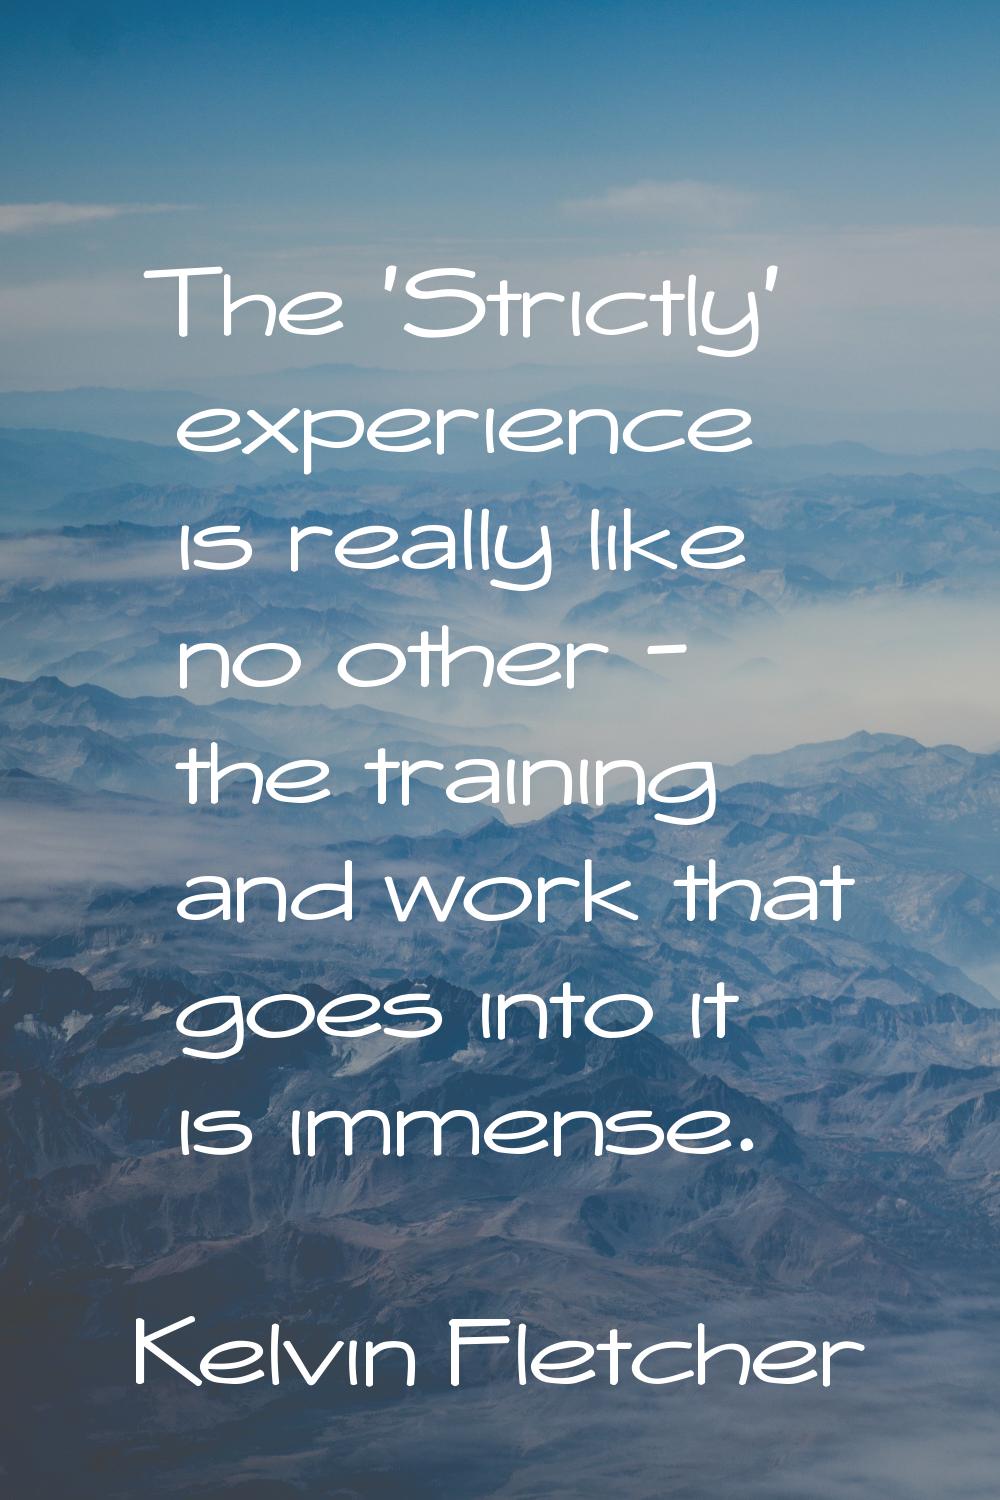 The 'Strictly' experience is really like no other - the training and work that goes into it is imme